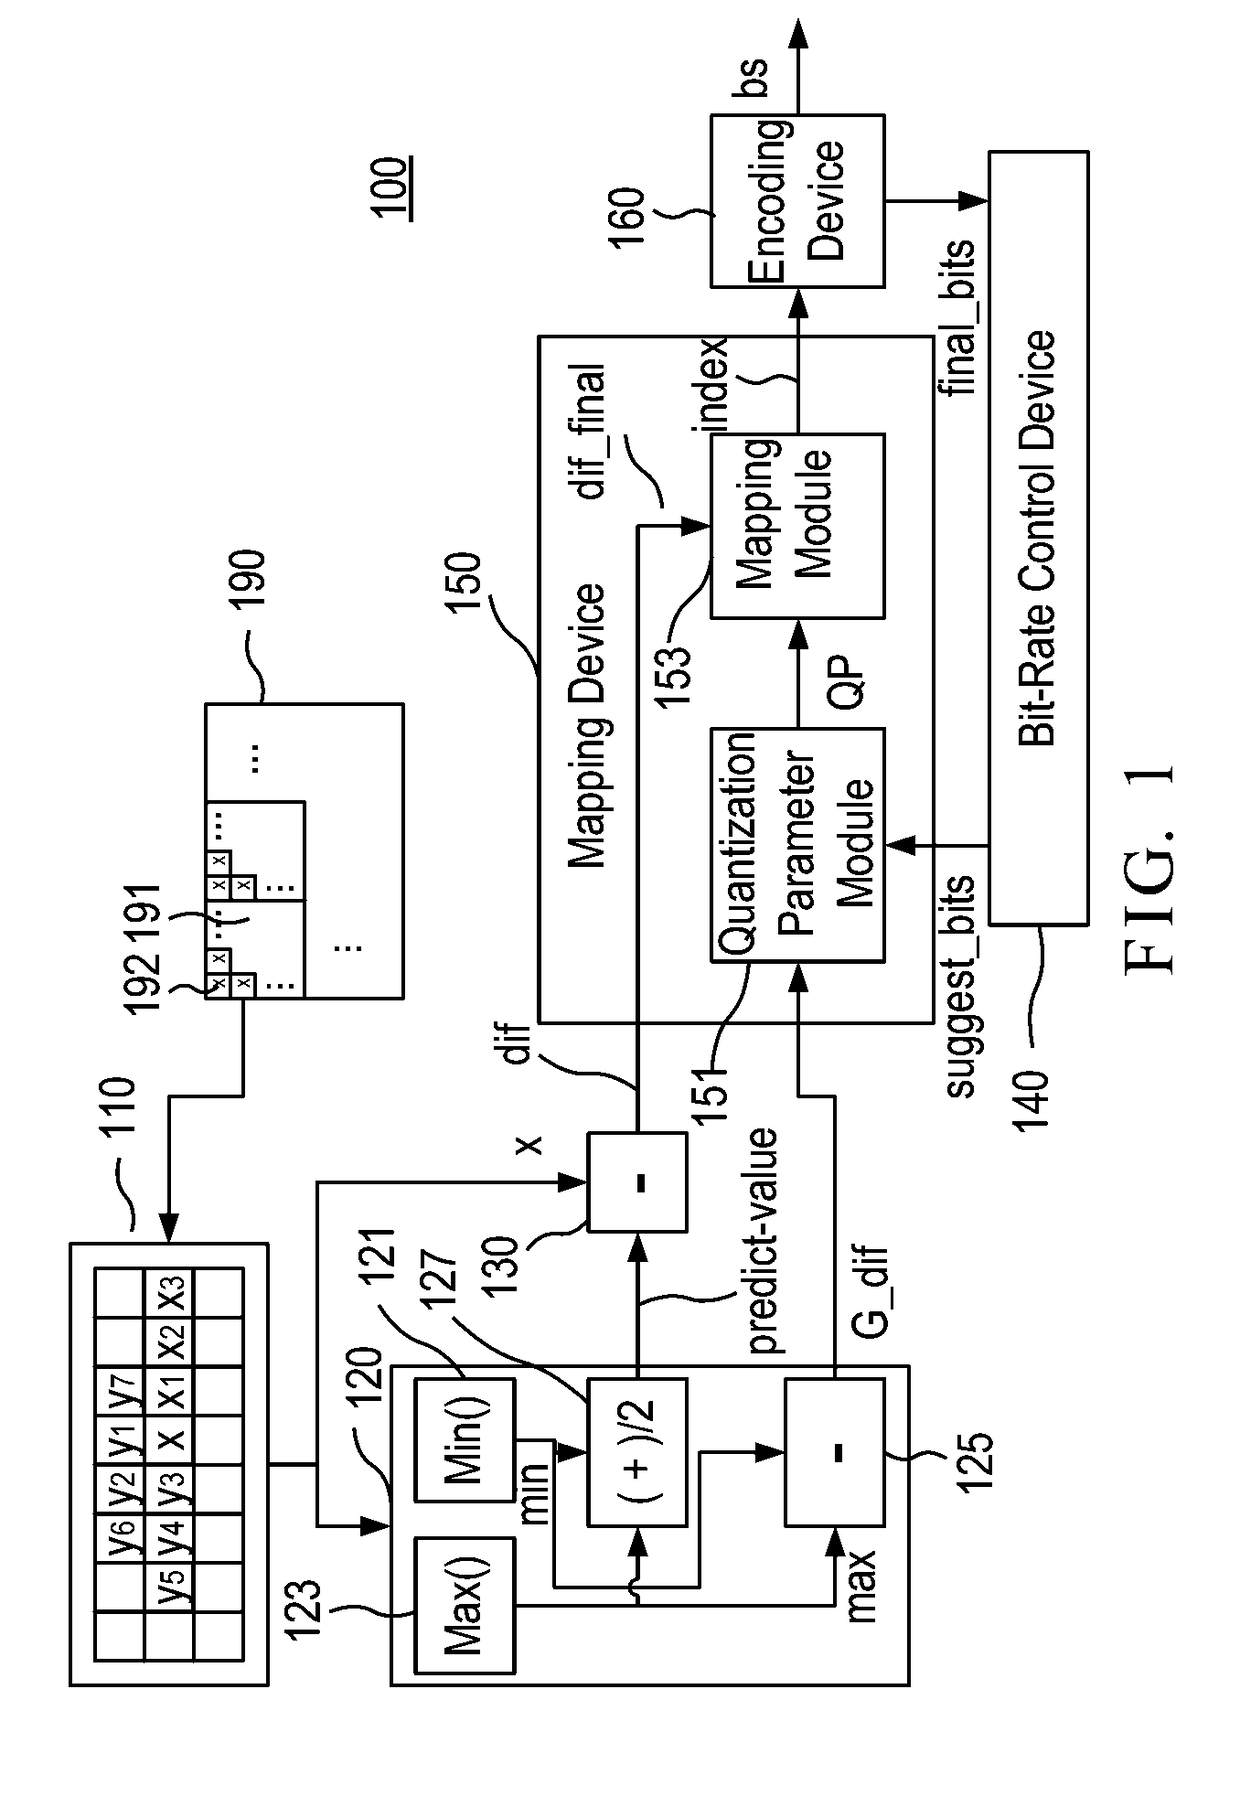 Image compression system for dynamically adjusting compression parameters by content sensitive detection in video signal